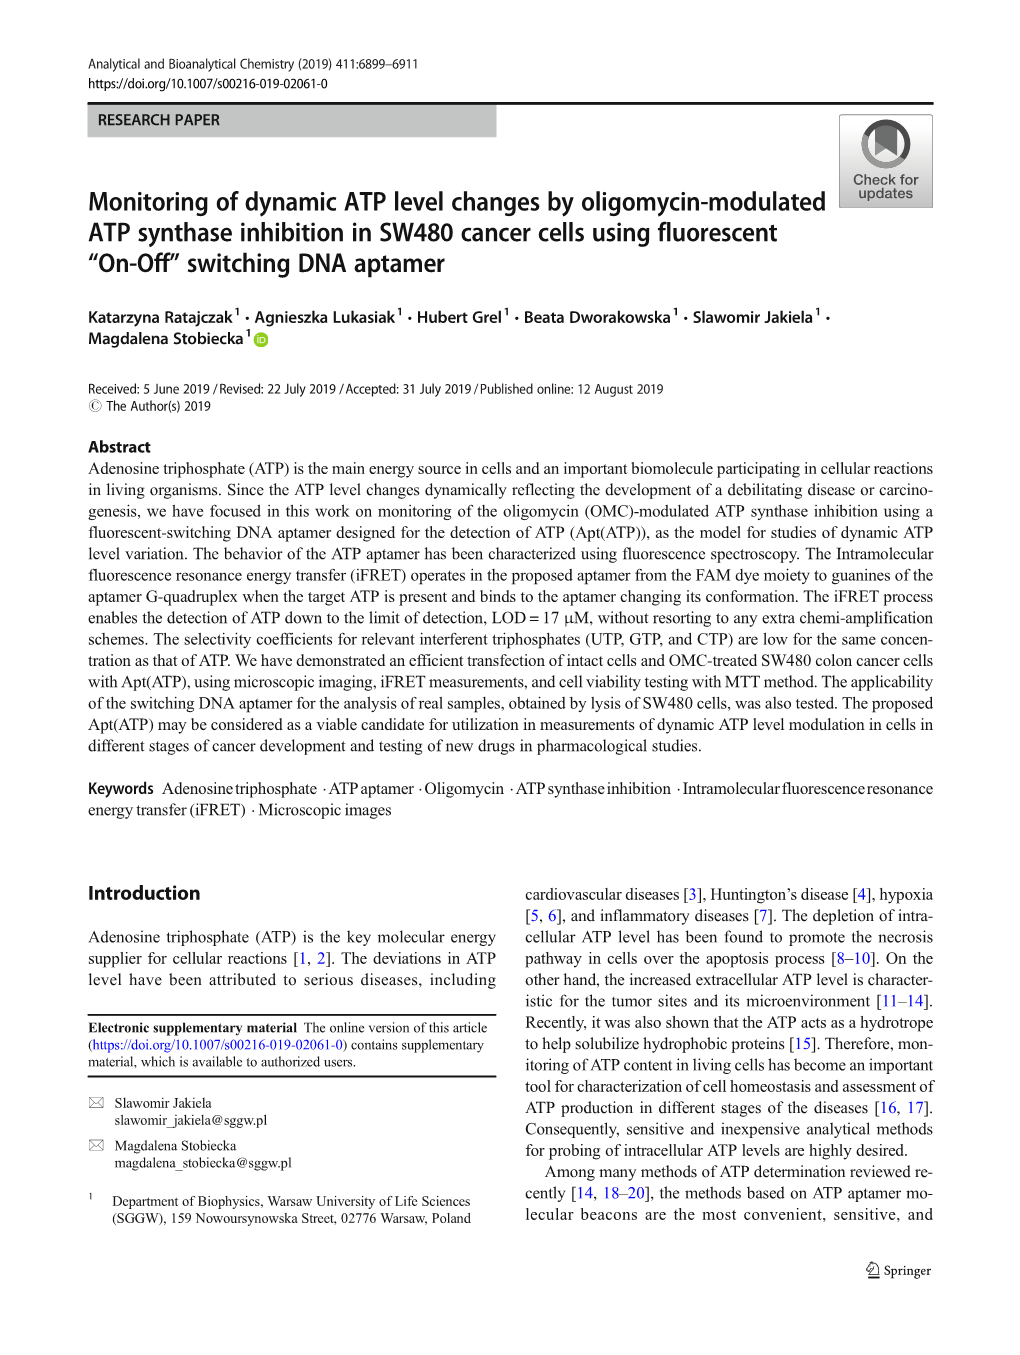 Monitoring of Dynamic ATP Level Changes by Oligomycin-Modulated ATP Synthase Inhibition in SW480 Cancer Cells Using Fluorescent “On-Off” Switching DNA Aptamer